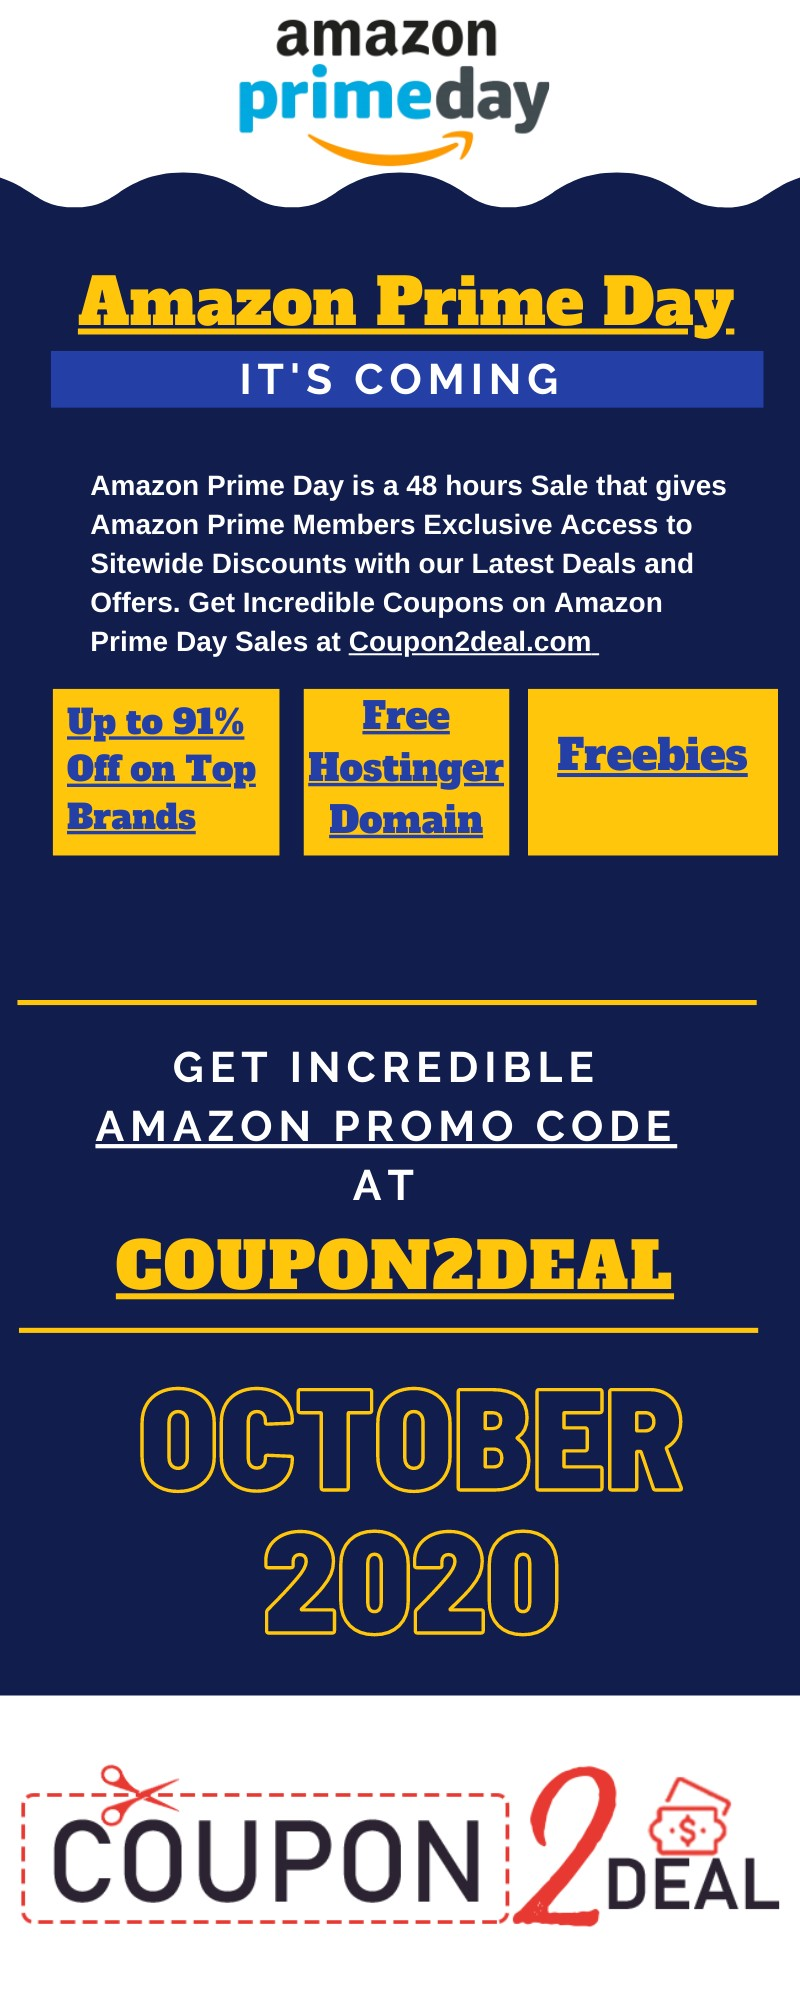 Celebrate Amazon Prime Day with Coupon2deal